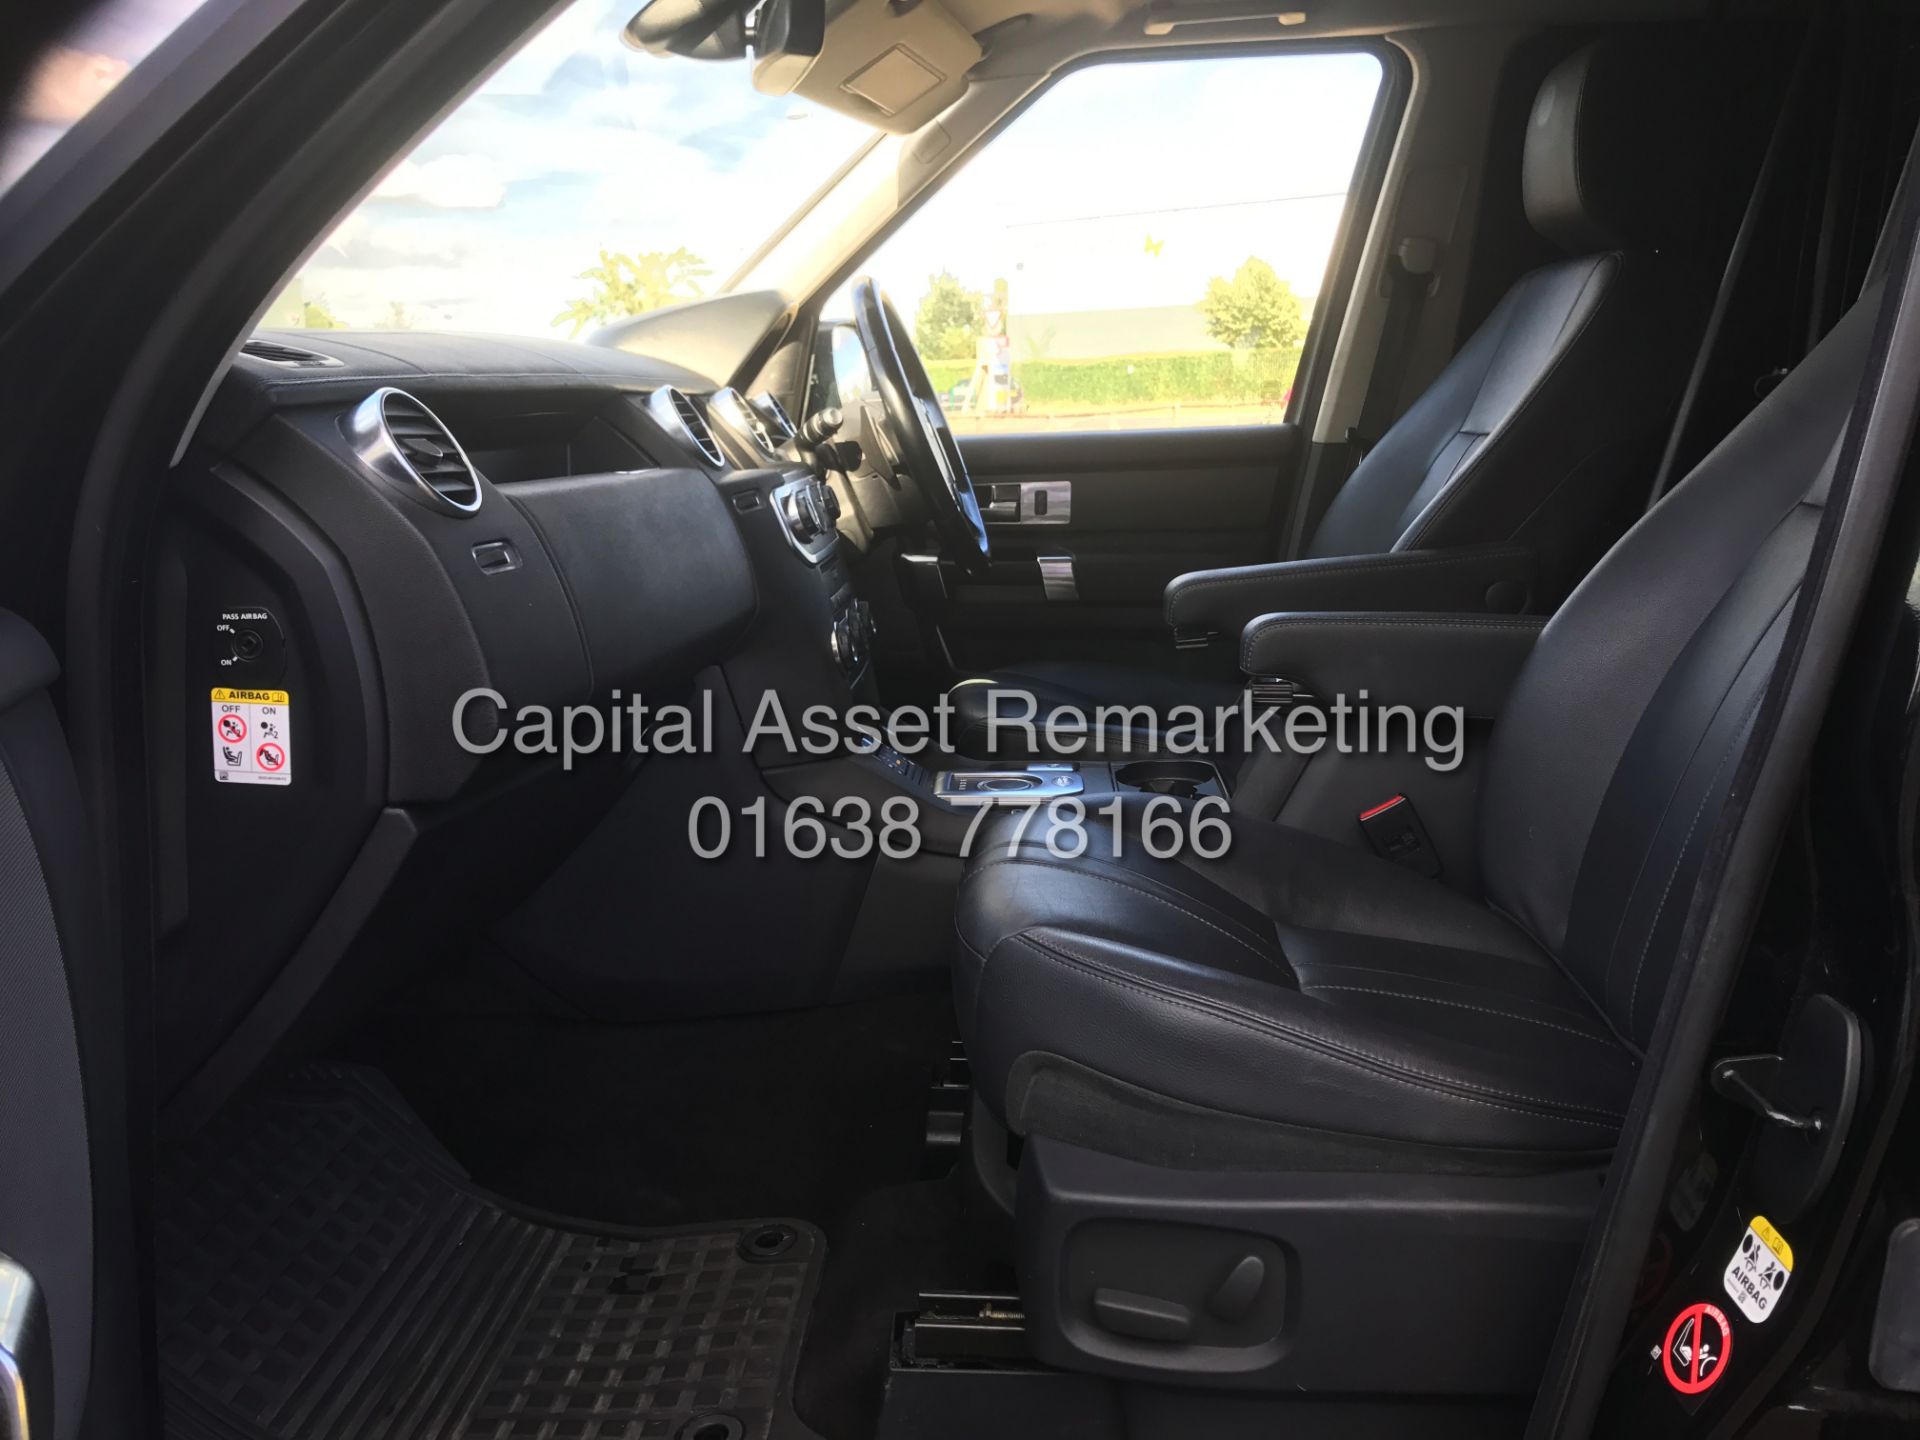 ON SALE LAND ROVER DISCOVERY 4 "3.0SDV6 - AUTO"COMMERCIAL (2014 MODEL) HUGE SPEC - SAT NAV -LEATHER - Image 20 of 31